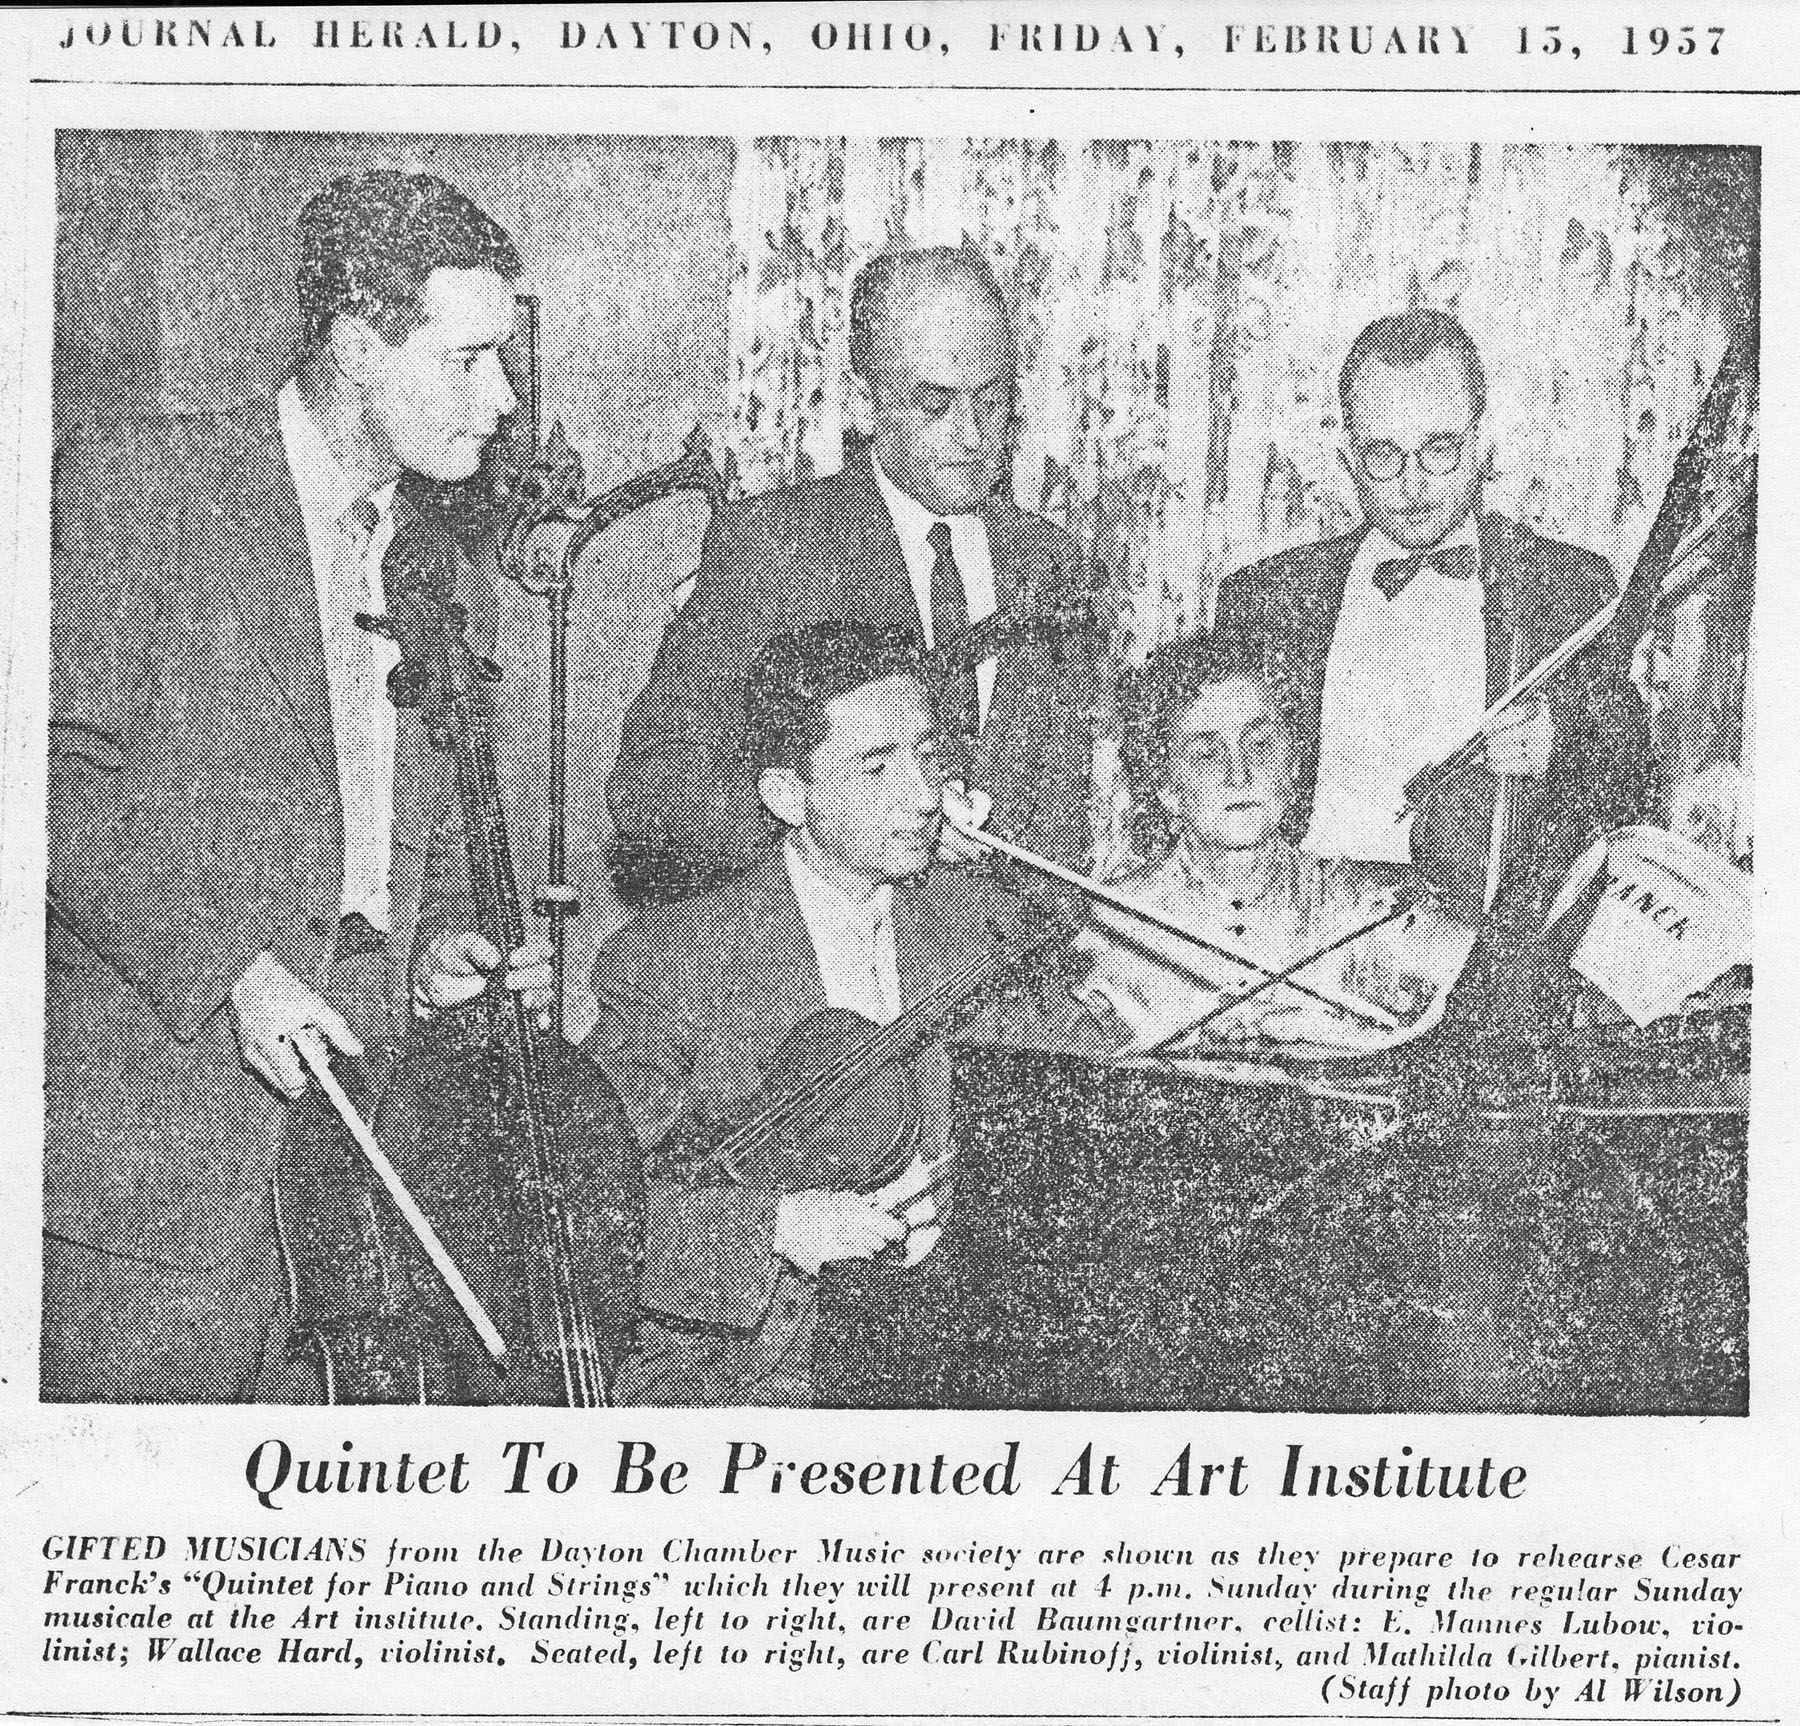 Newspaper article about Dayton Chamber Music Society performance at Art Institute, February 13, 1957. (MS-531, Box 3, File 5)